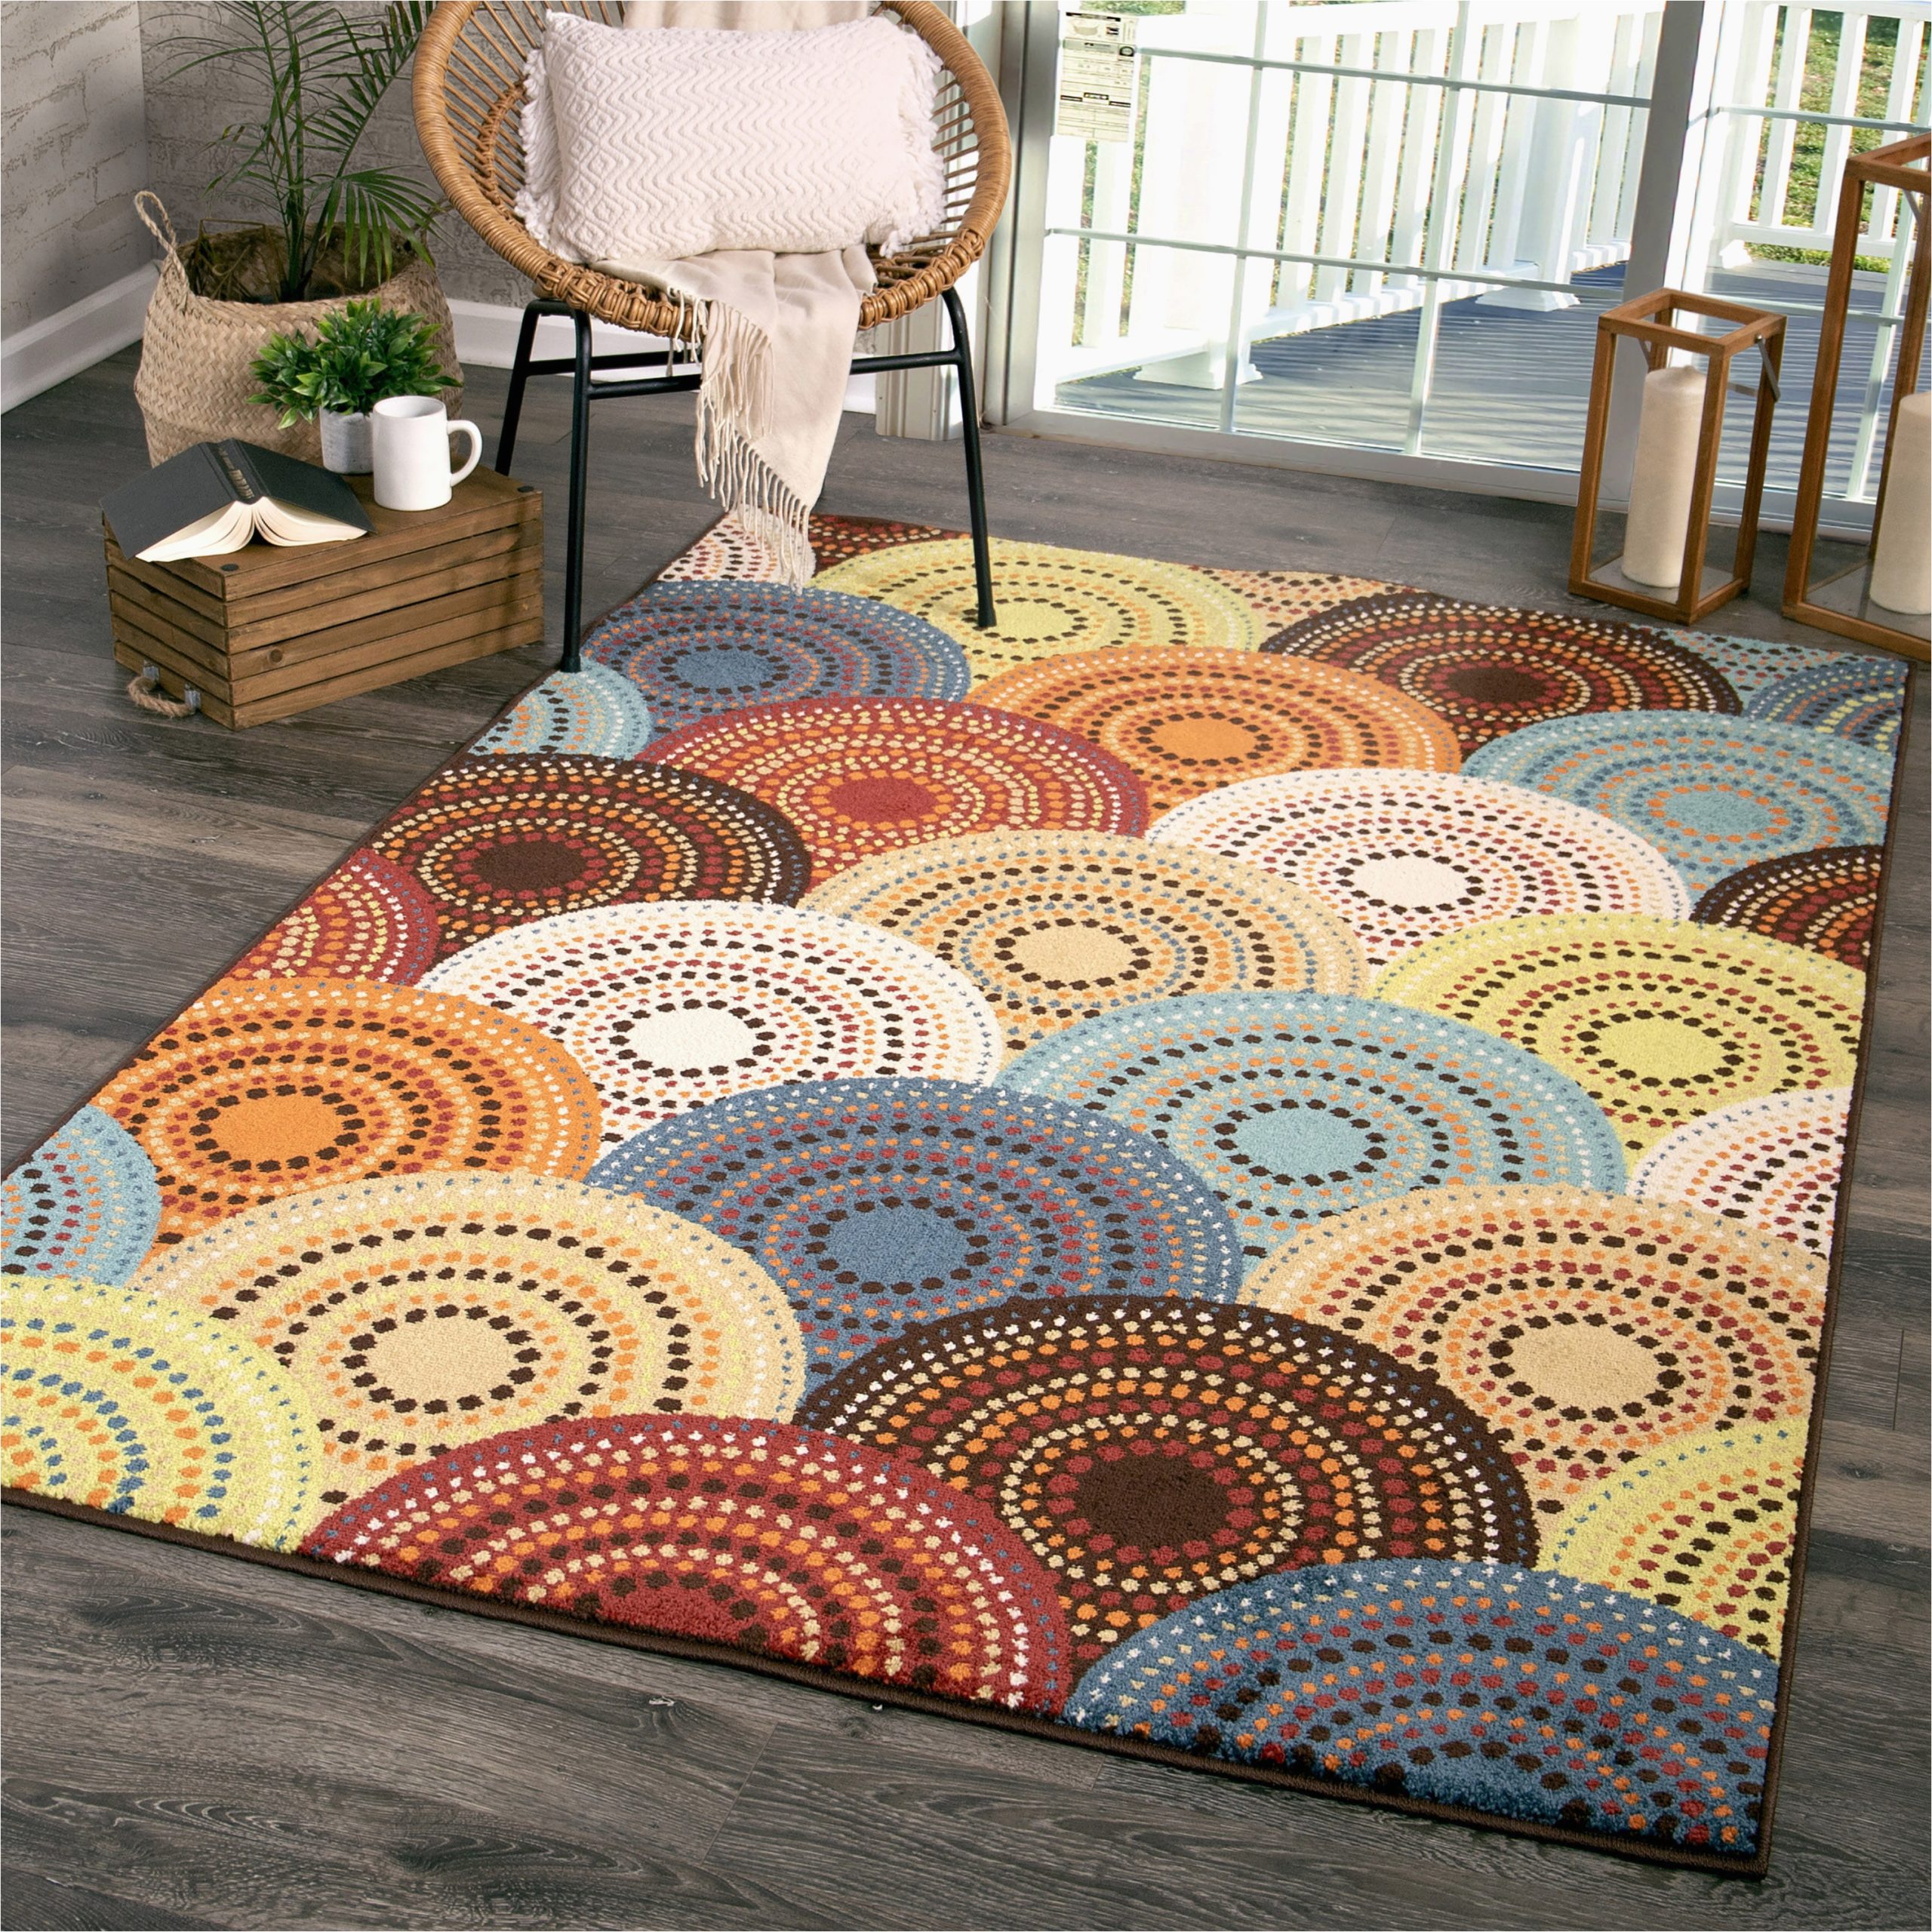 Better Homes and Gardens Bright Dotted Circles area Rug Better Homes and Gardens Bright Dotted Circles area Rug, 5′ X 7′